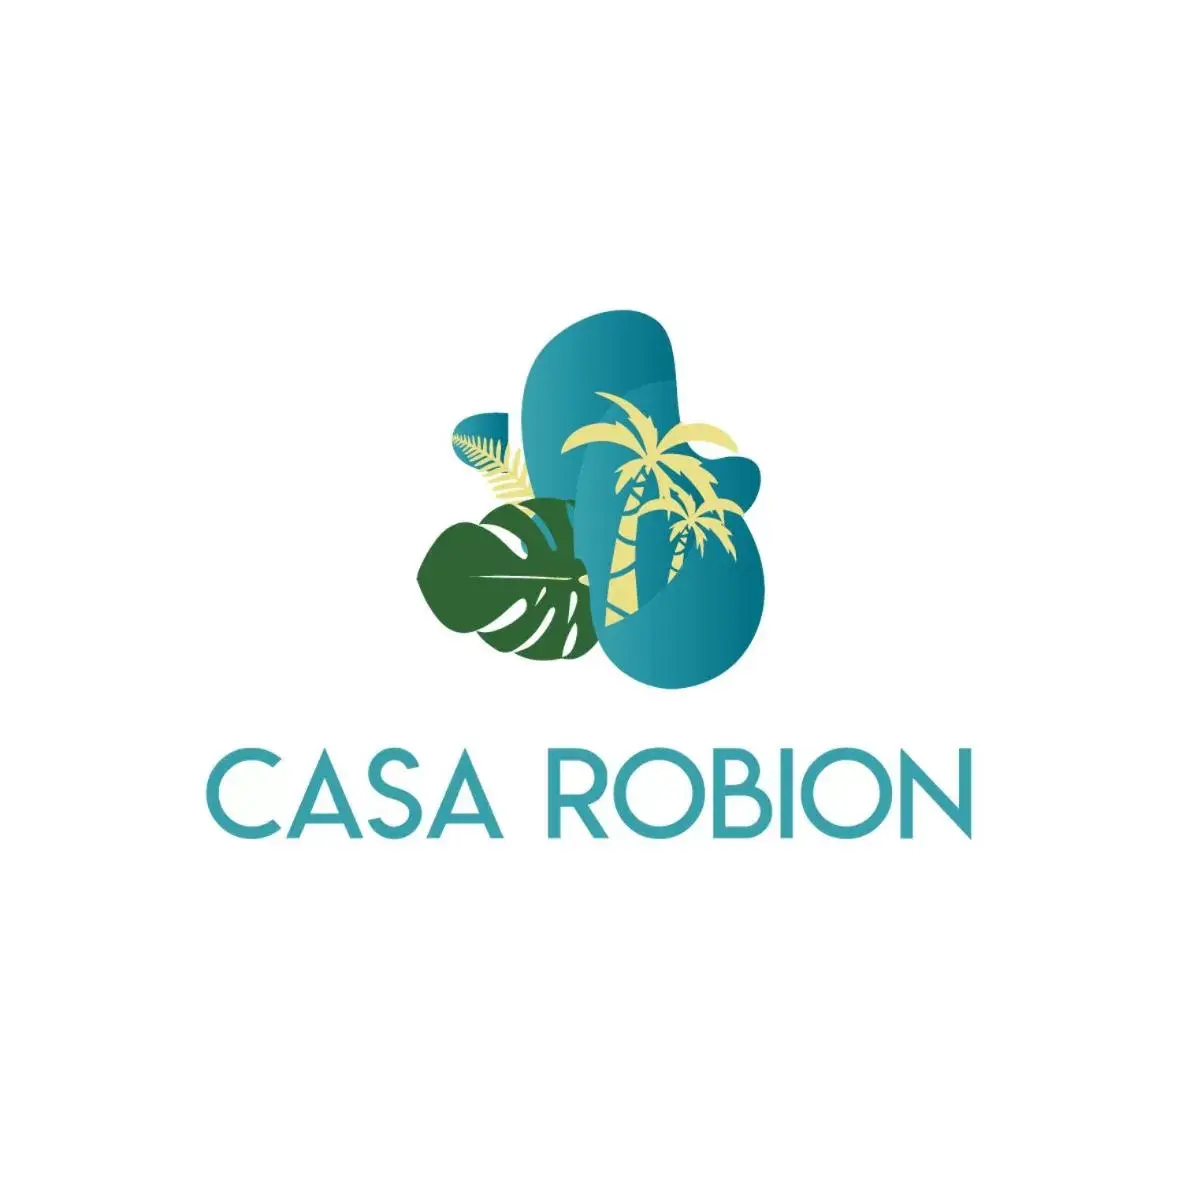 Property logo or sign in Casa Robion